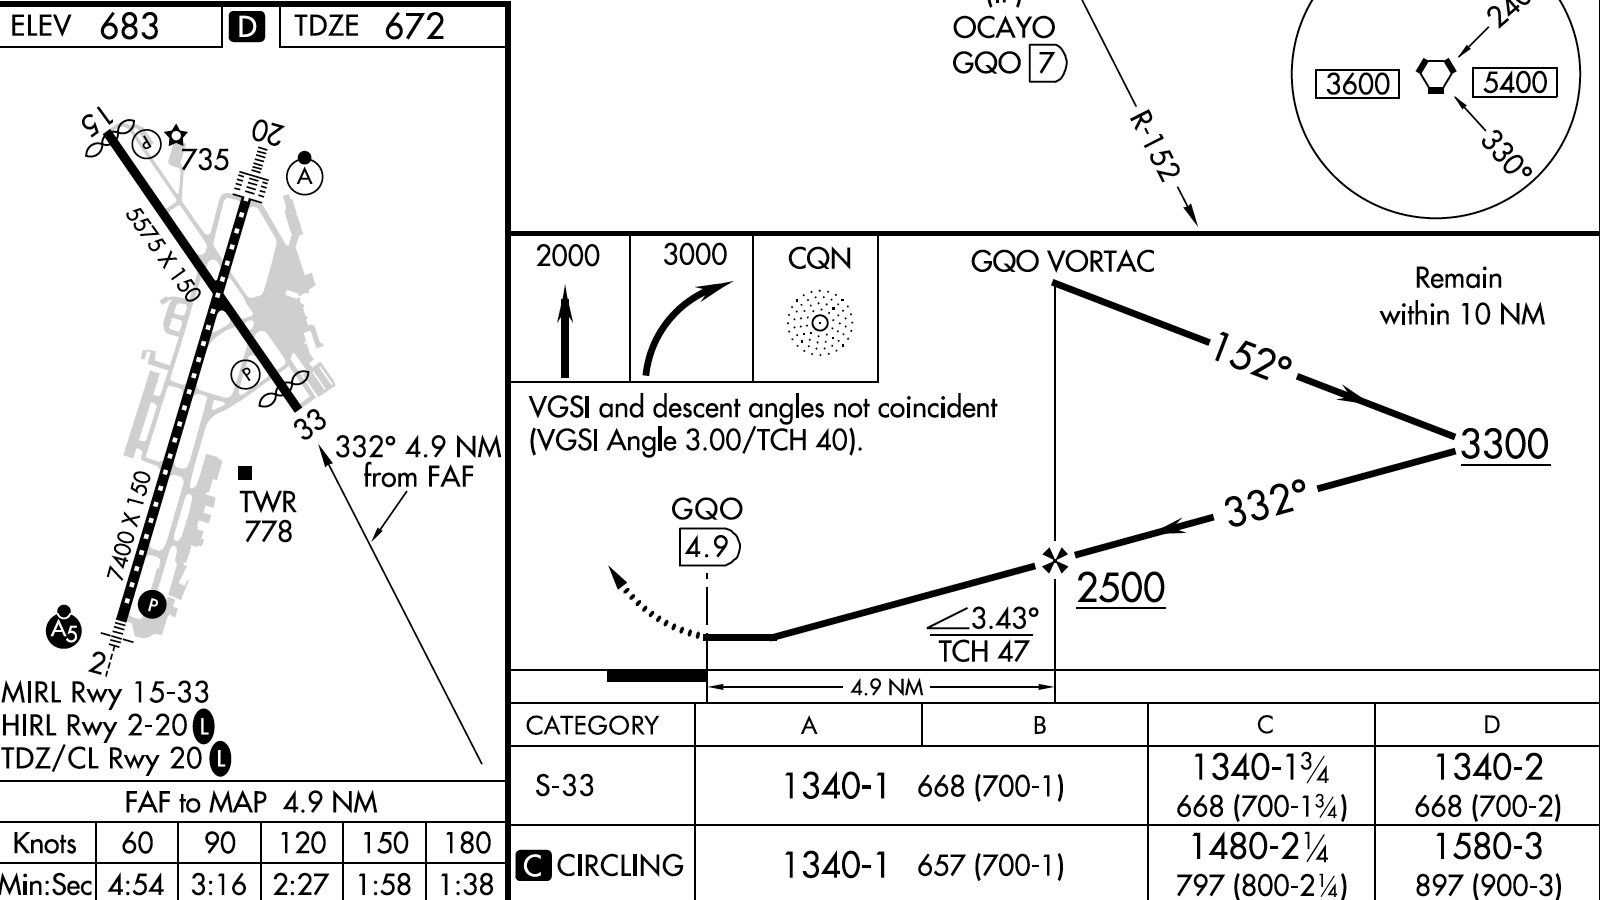 Here’s a snapshot of a VOR approach with some areas of concern. First, there’s no visual descent point (VDP) that would allow a normal descent angle to the runway. Next, the missed approach point is at the runway threshold, and when the pilot reaches it, he/she is 668 feet (straight-in minimums) or 657 feet (circling minimums) above the threshold. The temptation is to dive for the runway, which has a displaced threshold. Also, the missed approach point is defined by elapsed time from the final approach fix. Forgetting to mark your time leaves you uncertain of your position—unless you have either DME or GPS information from the GQO vortac. Of course, if the weather is low-IMC (ceiling at or below 500 feet, and/or visibility at or below one mile) this approach isn’t much help. But if you fly it anyway and happen to see the runway, there’s the risk of re-entering the clouds, and more pressure to dive to the threshold.